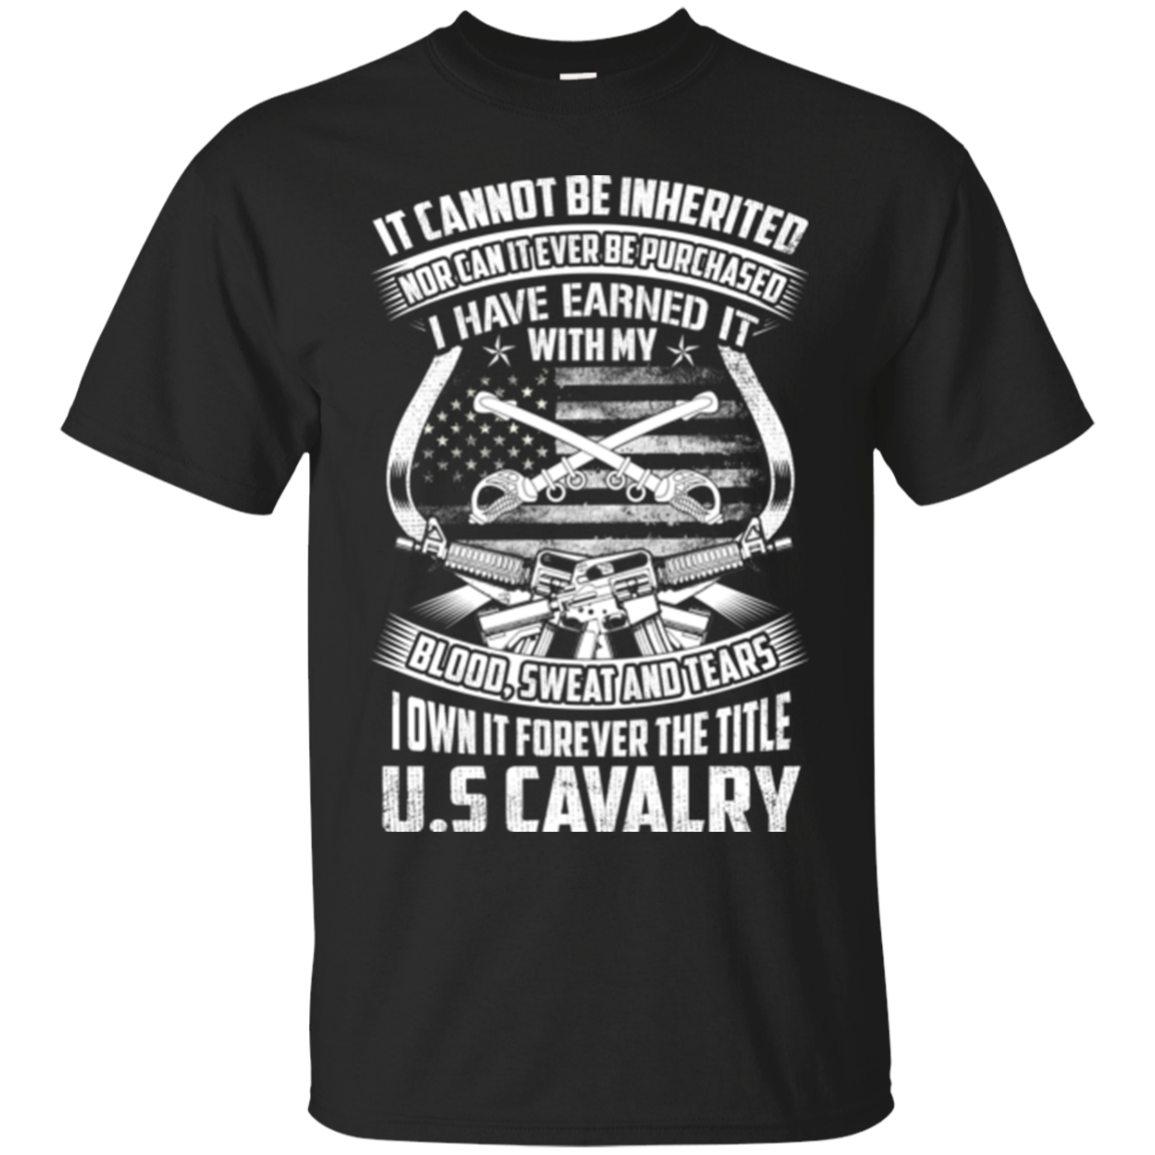 US Cavalry Shirts I Own It Forever The Title US Cavalry - Teesmiley